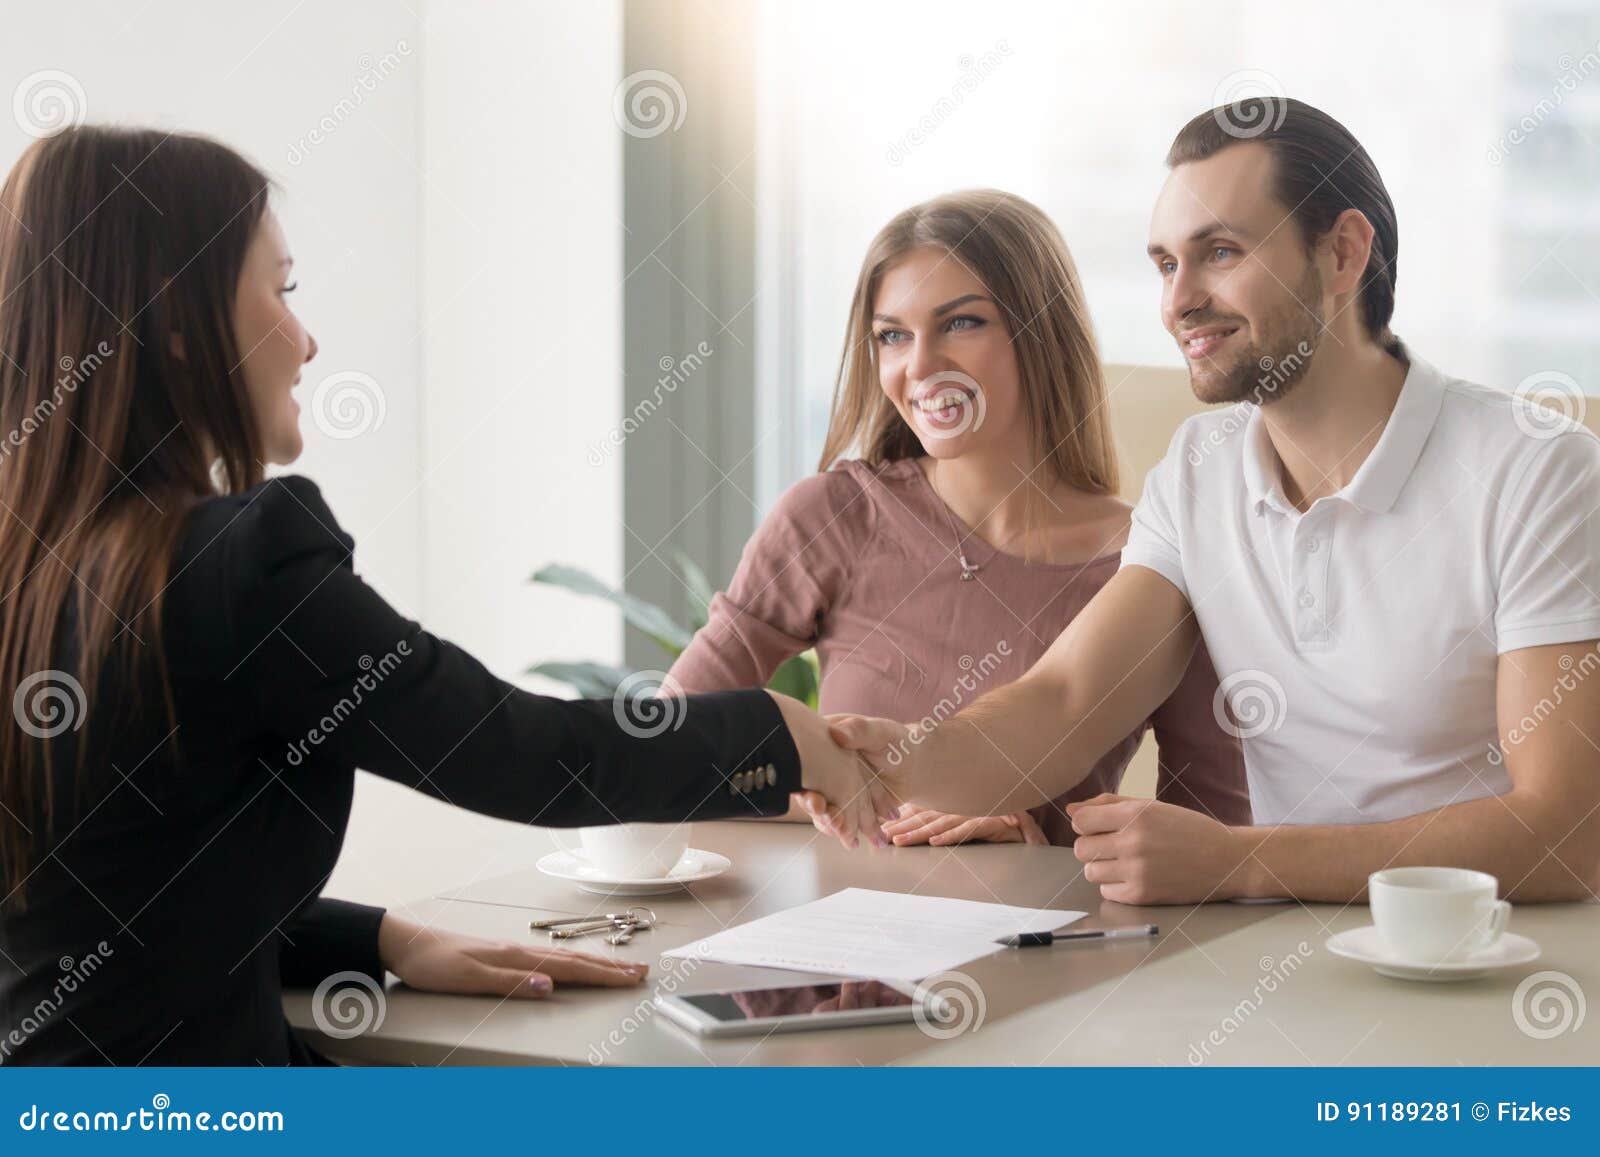 young family couple meeting with broker, handshake izing a